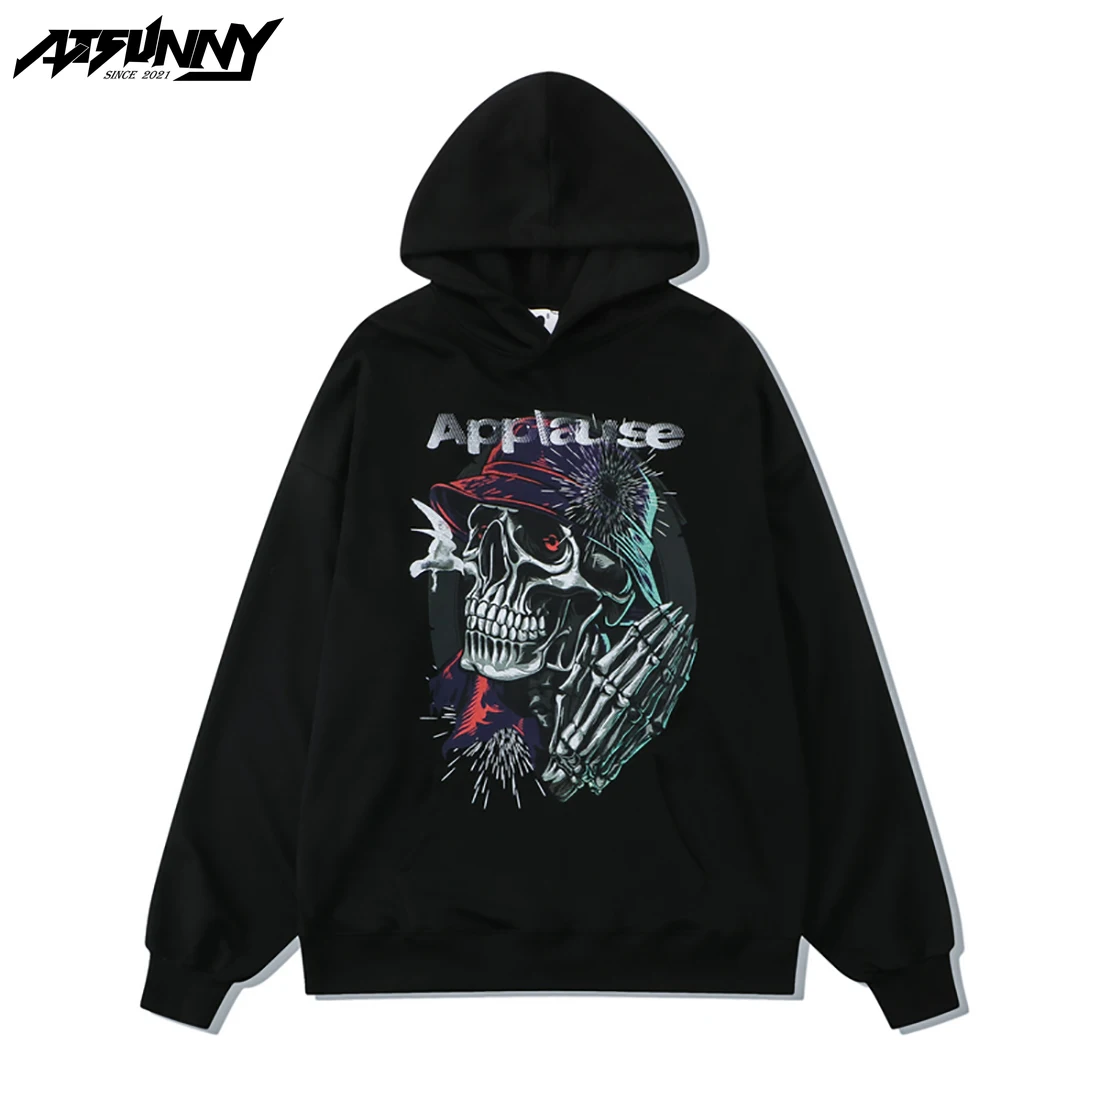 

ATSUNNY Applause Skeleton Print Streetwear Hip Hop Hoodie Pullover Harajuku Retro Gothic Hoodies Thicken Oversize Clothes Tops